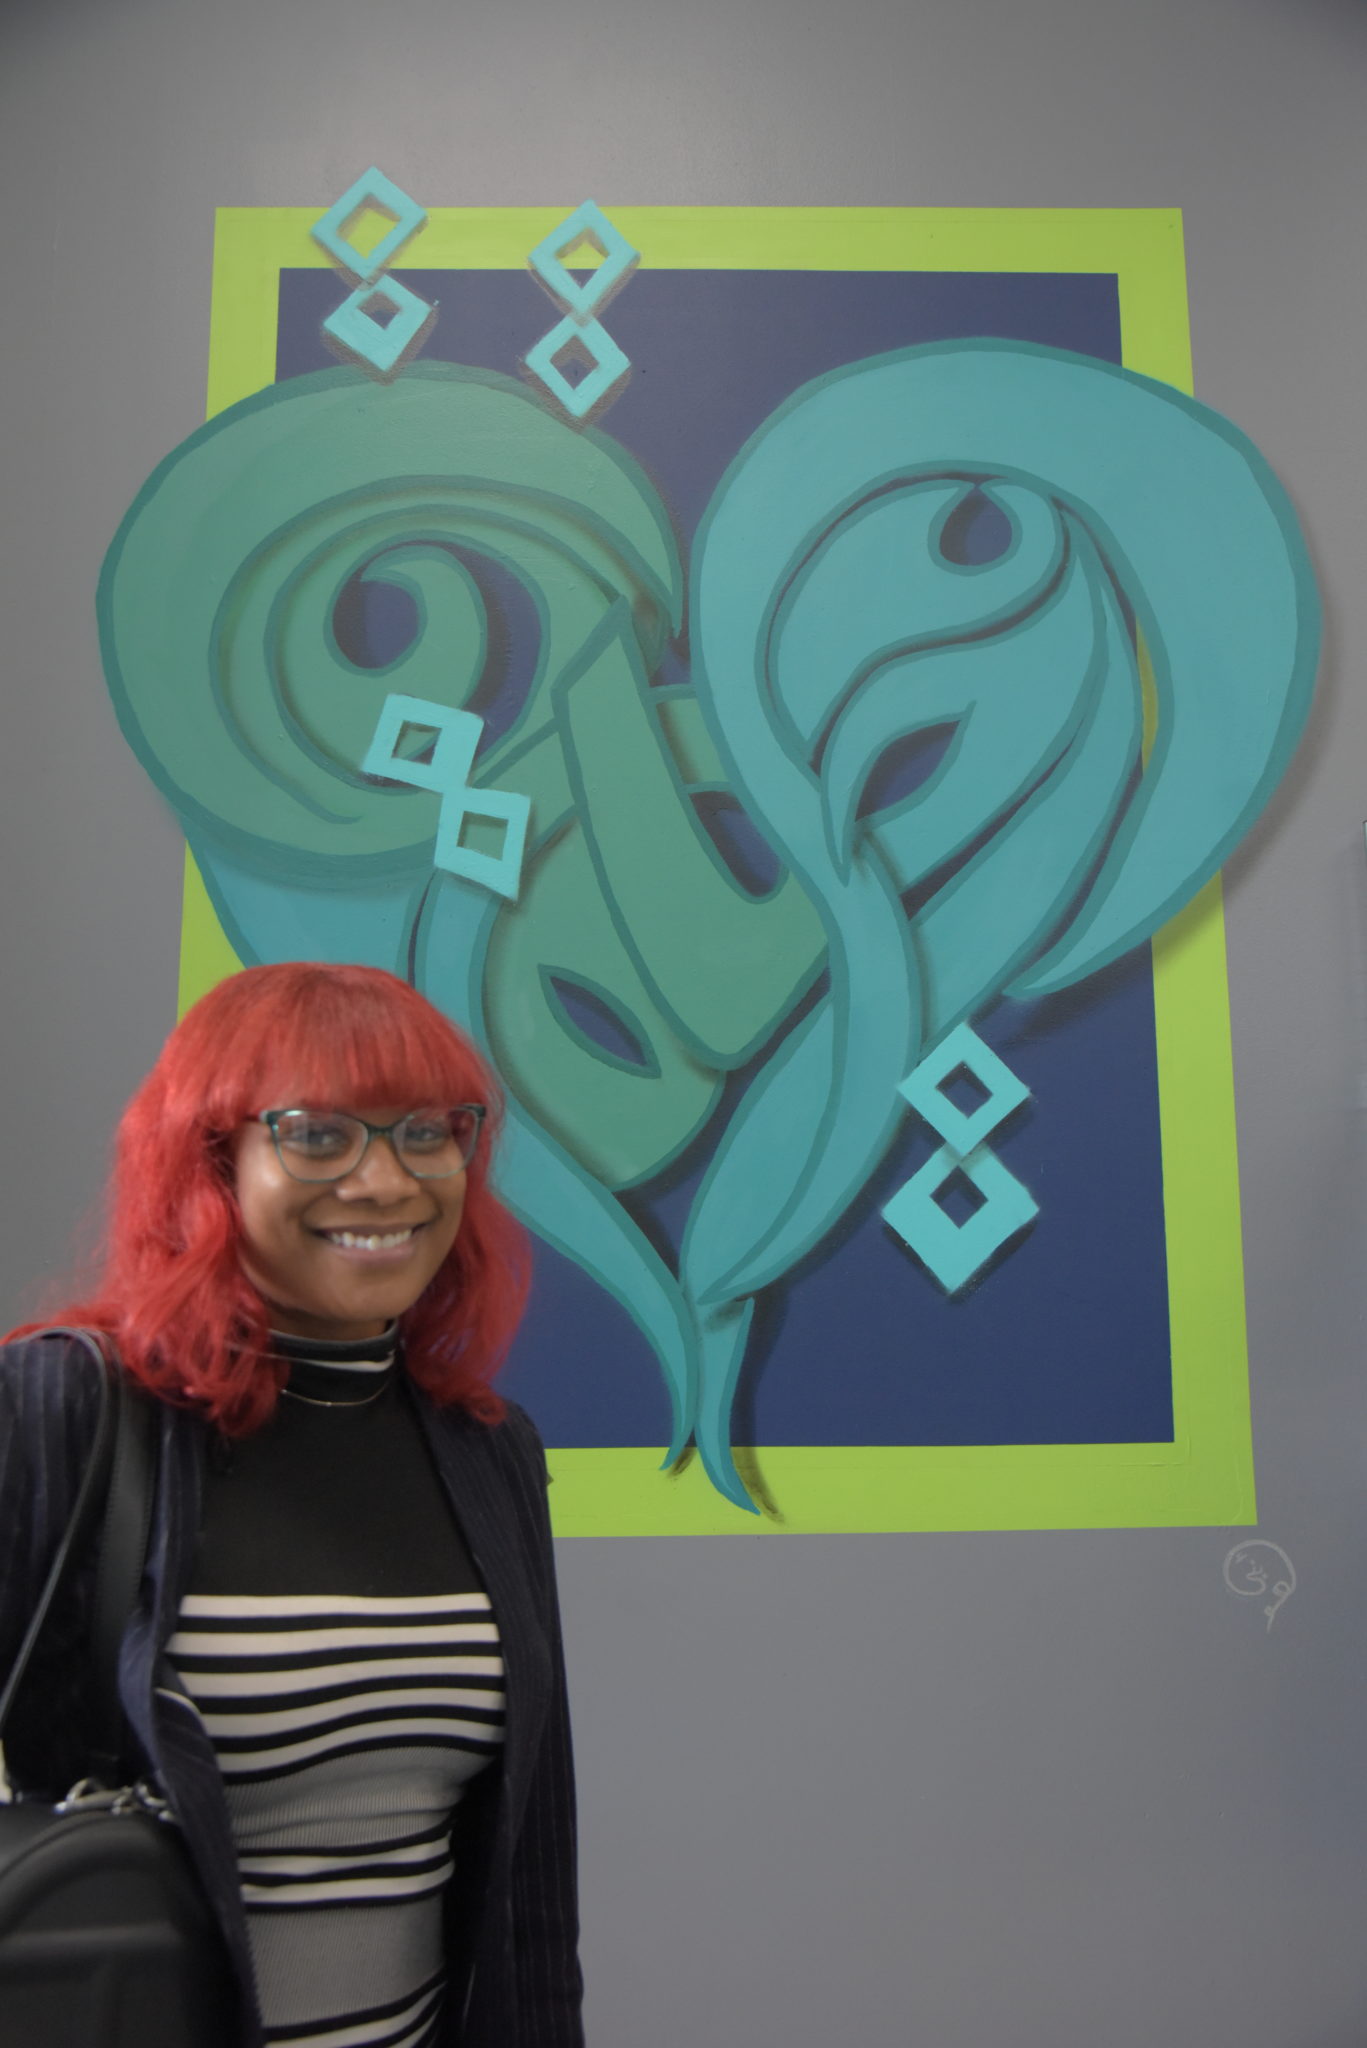 a woman with red hair and glasses poses in front of her mural of the arabic script for "alive" written in the form of a heart in turquoise